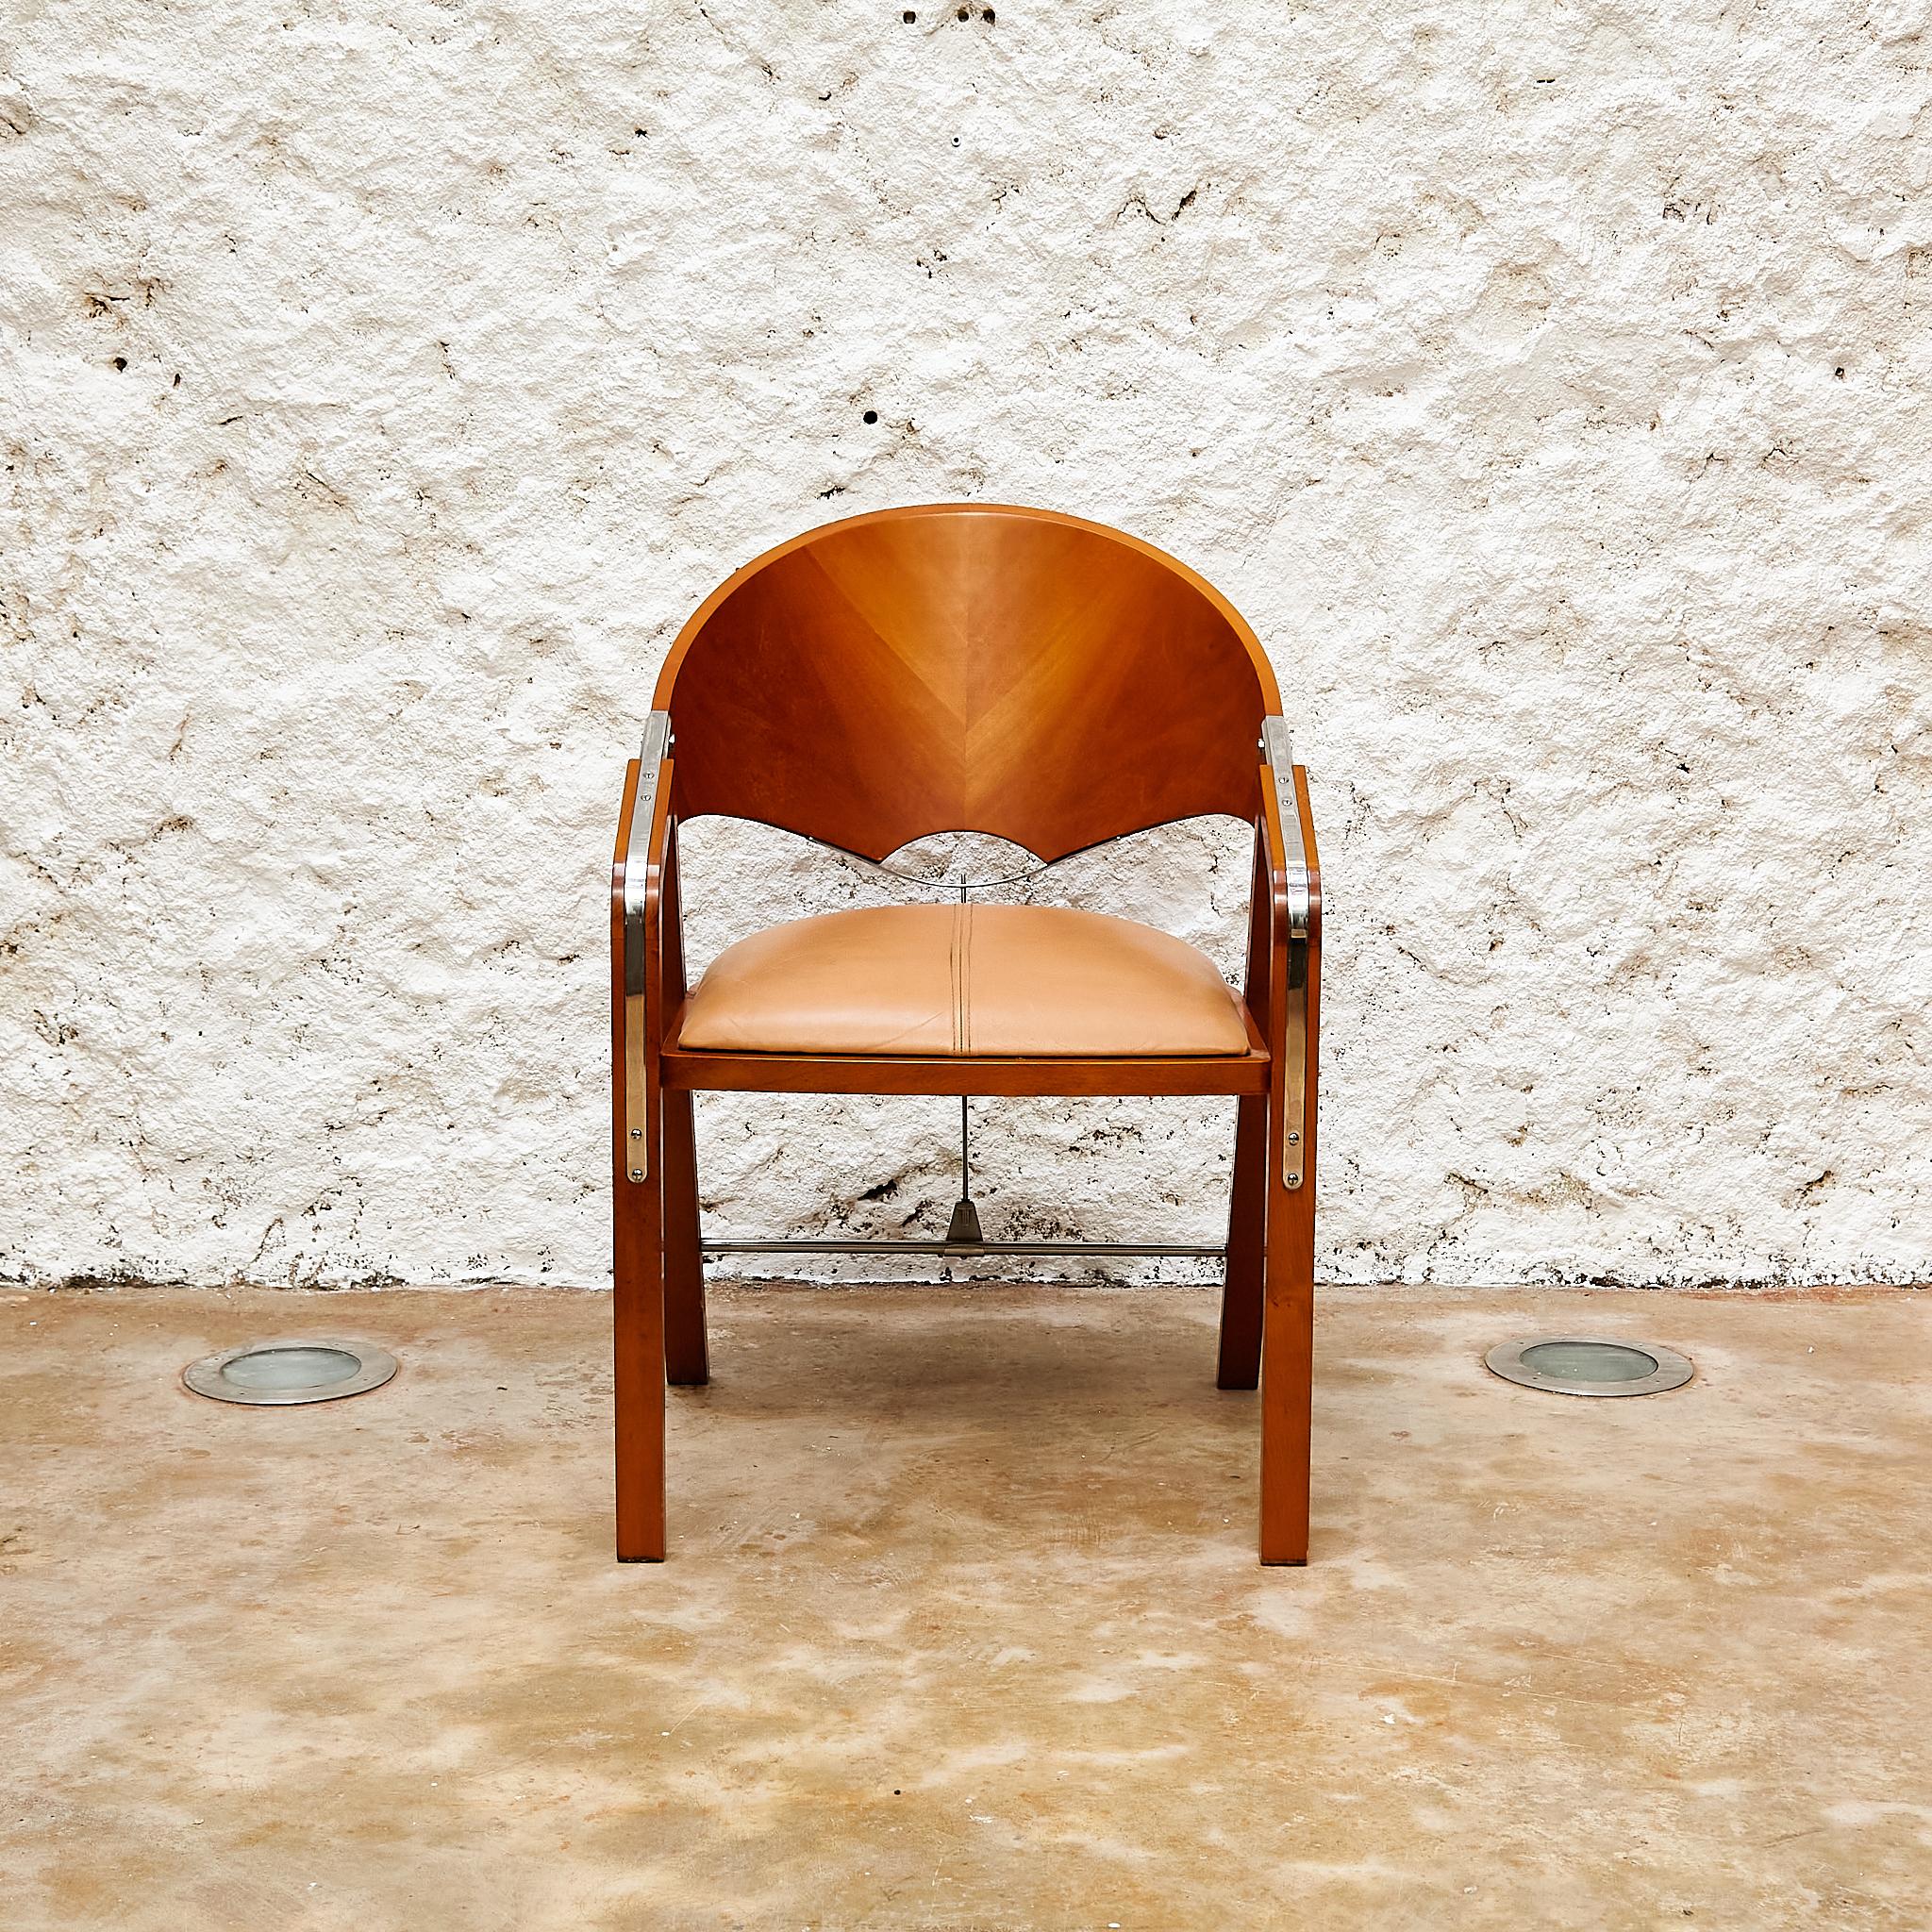 The Vintage 'Spinnaker' Chairs by Jamie Tresserra - Wood, Metal and Leather For Sale 12